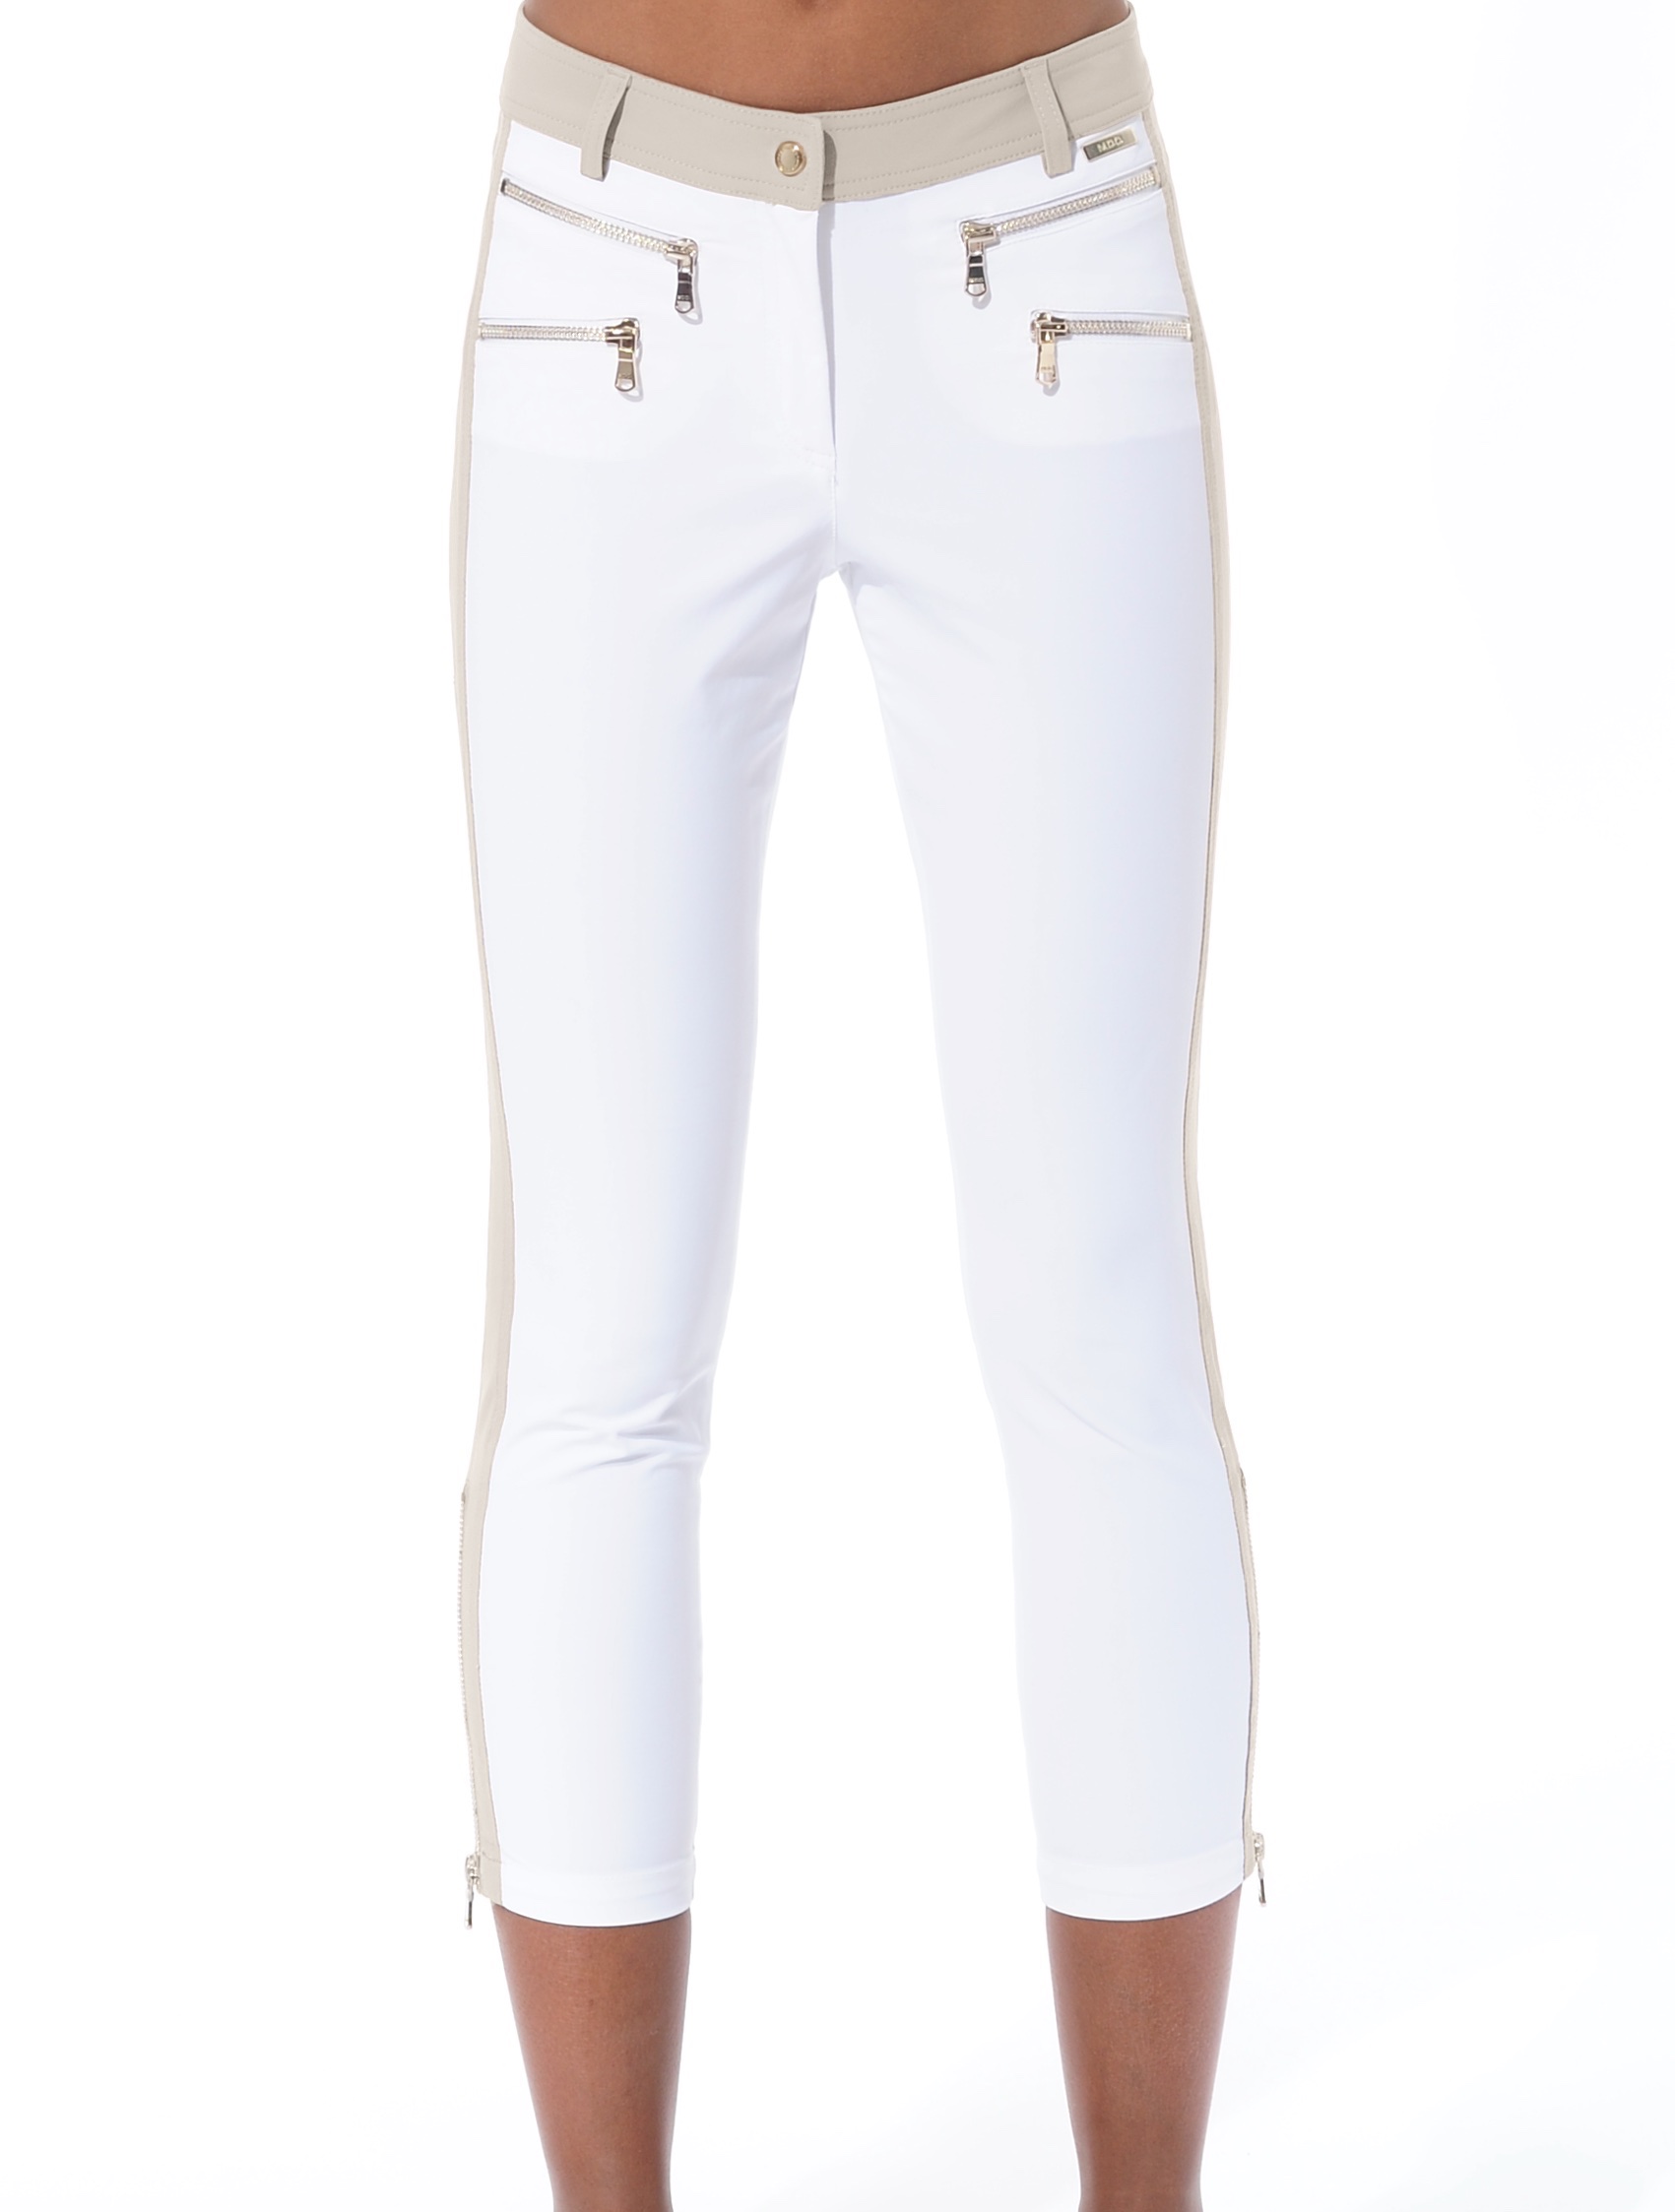 4way stretch double zip cropped pants white/light taupe 